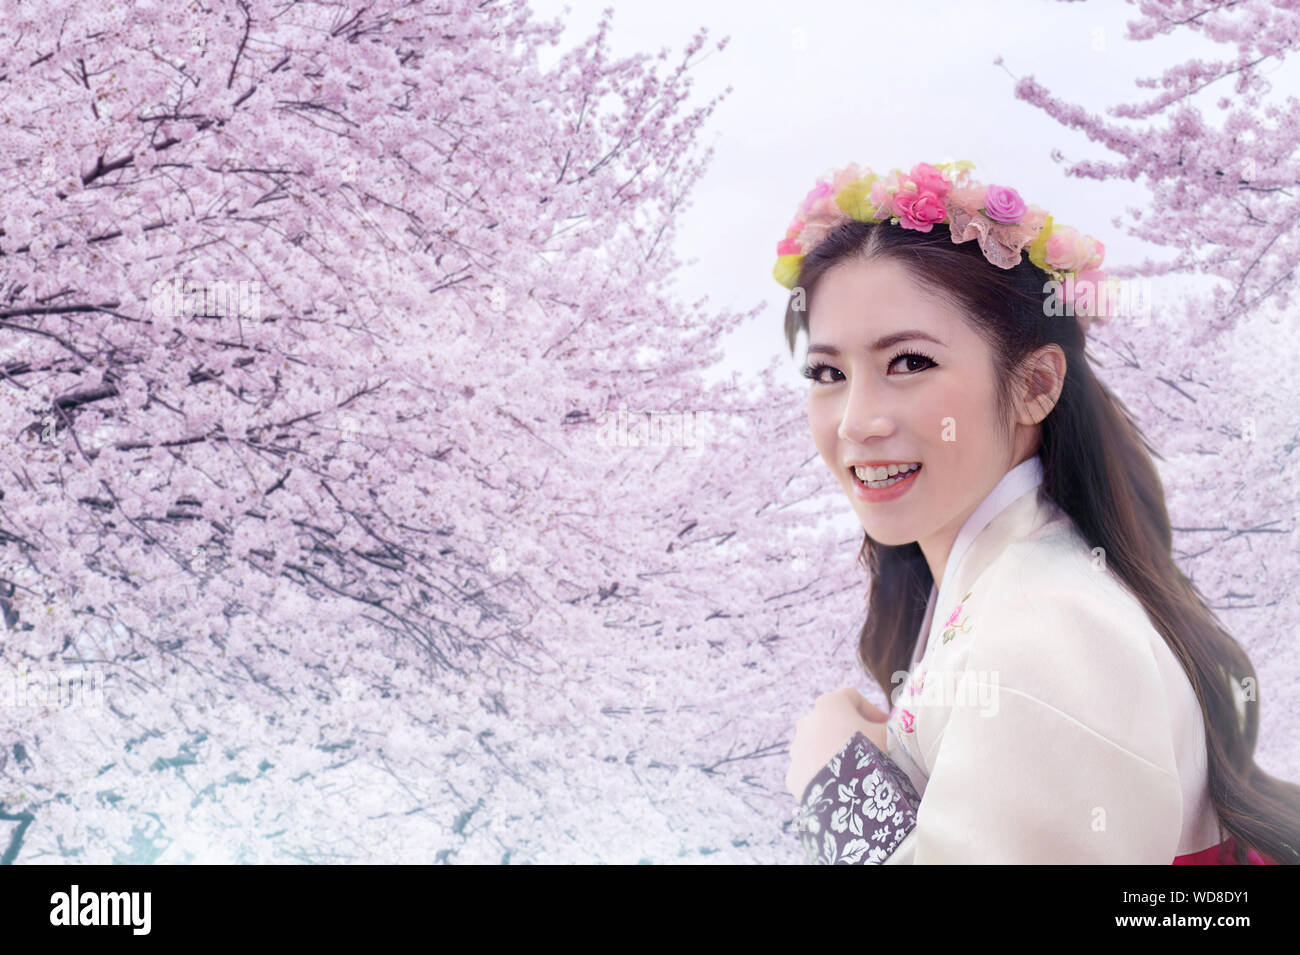 Portrait Of Smiling Woman Wearing Hanbok Tradition contre Cherry Blossom Tree Banque D'Images